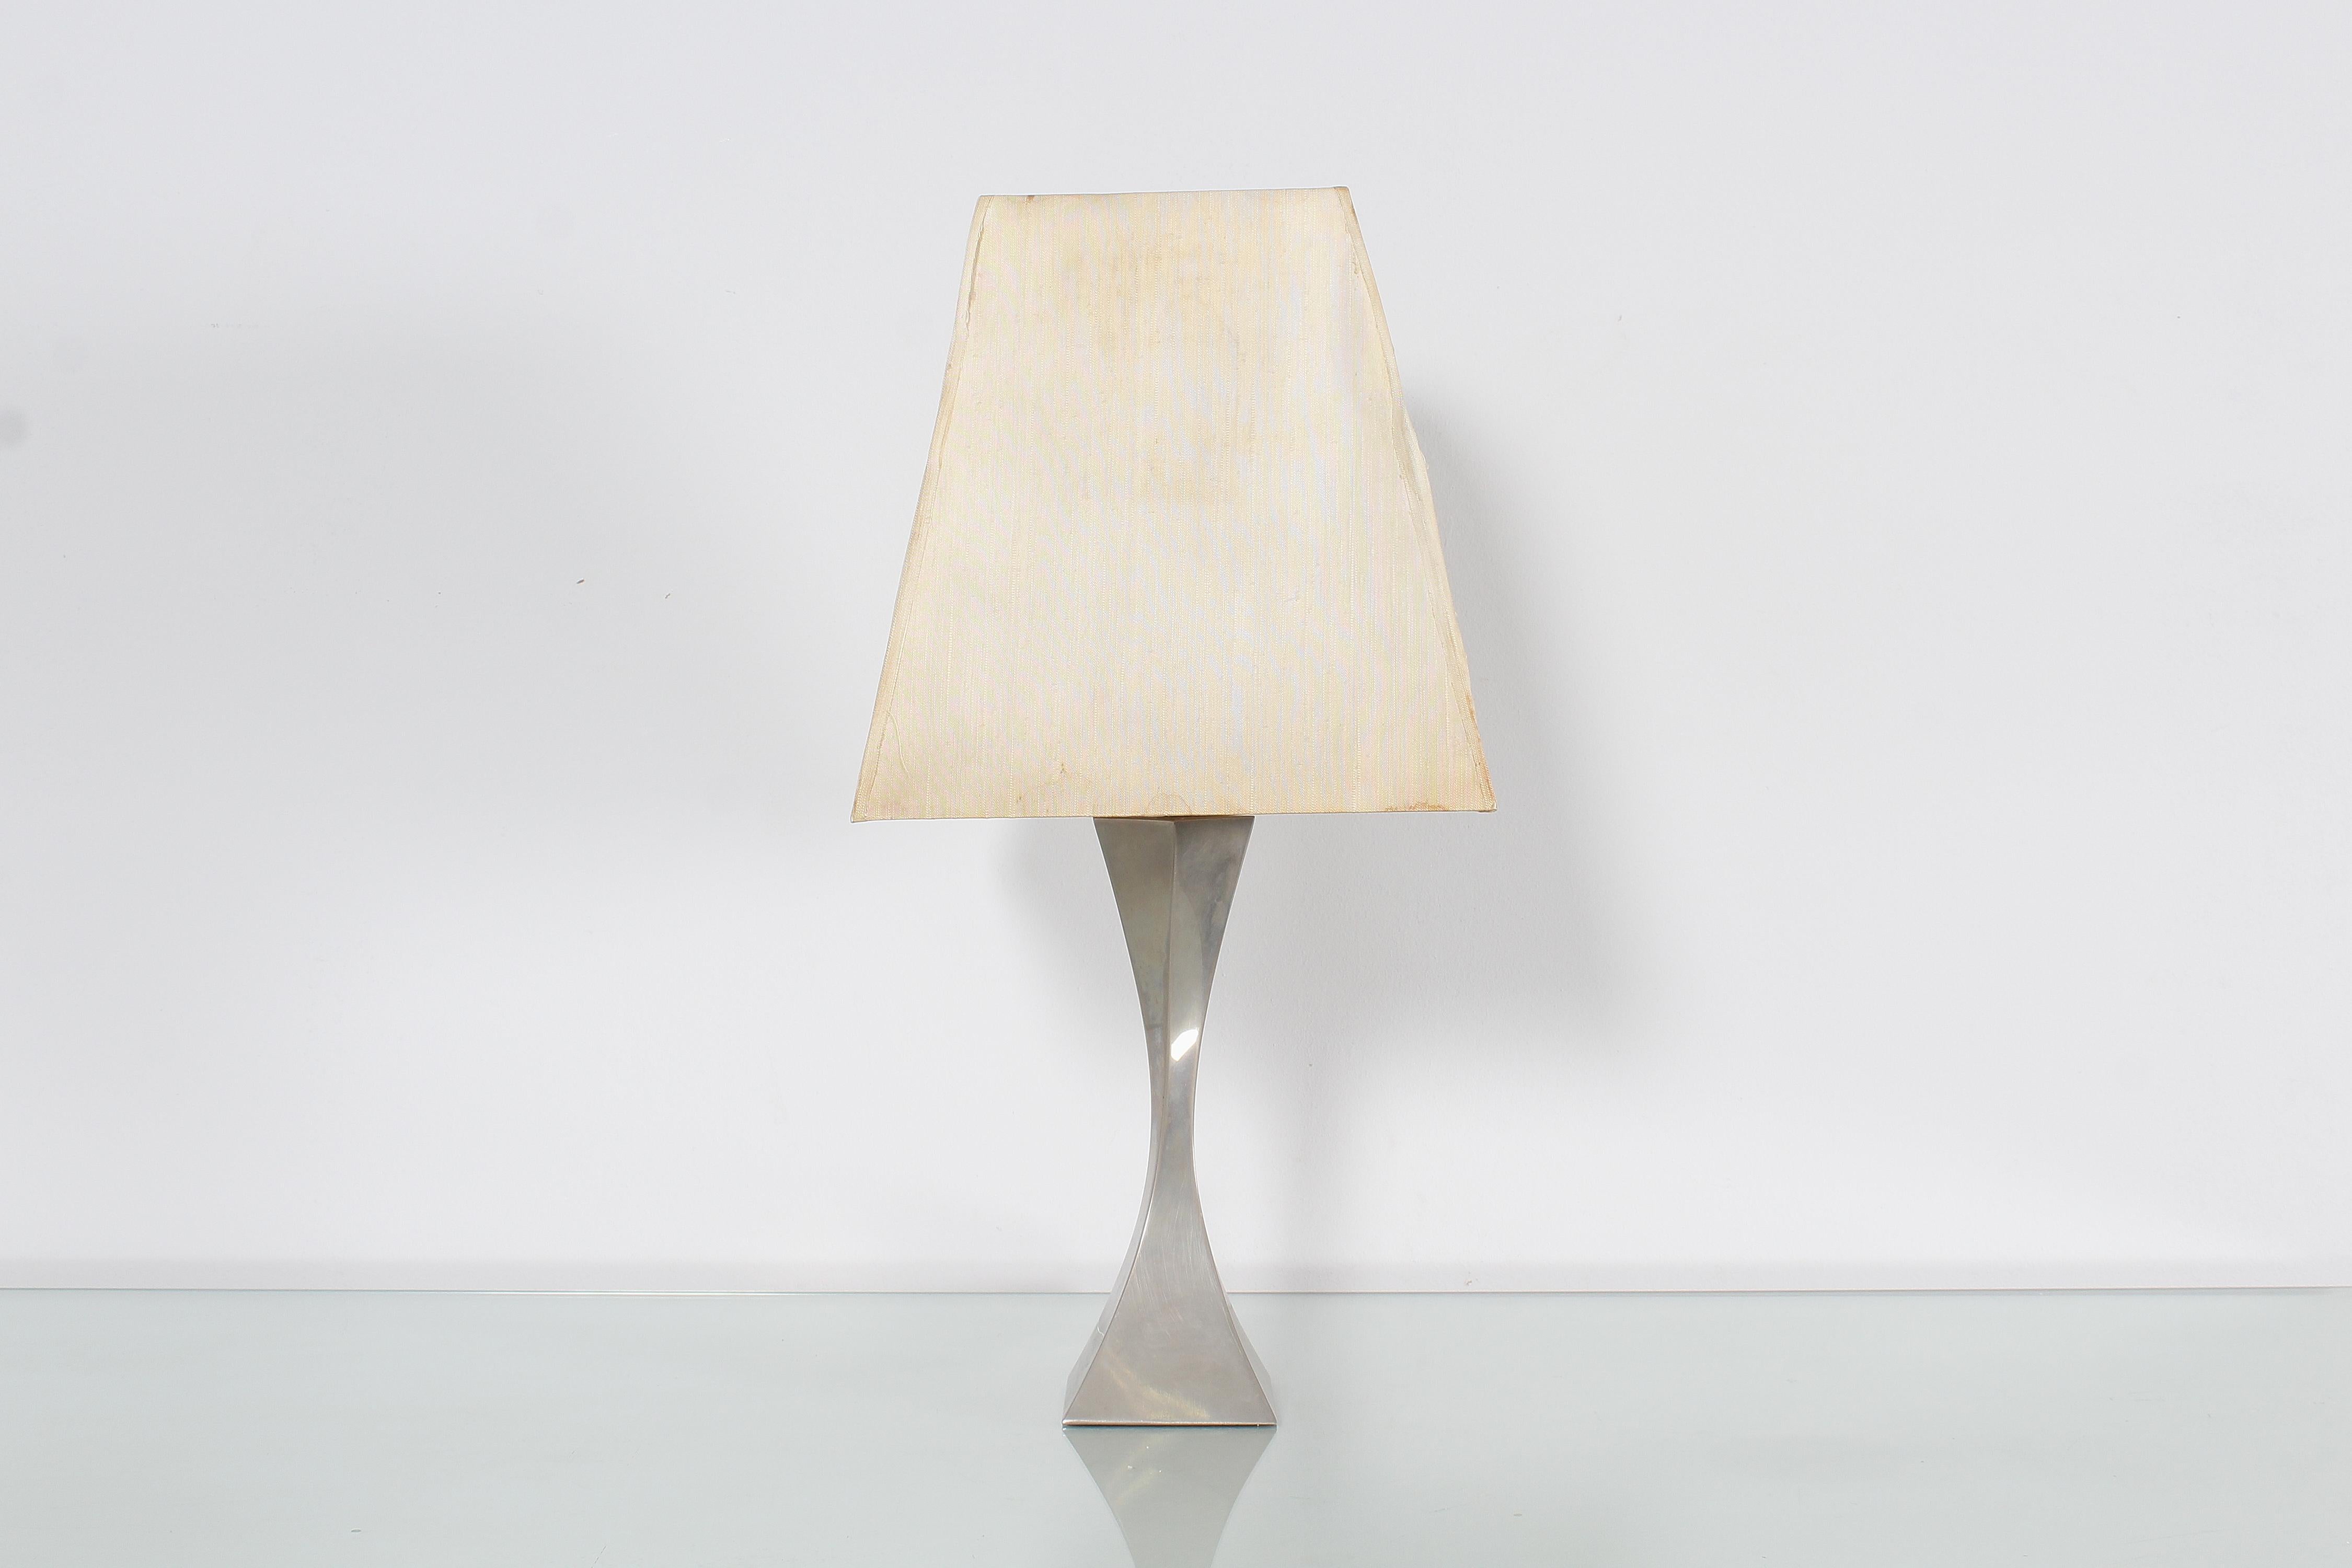 Stylish single light table lamp with nickel-plated brass base made up of two triangular pyramids, each slightly twisted, positioned head to head. Pyramidal lampshade in cream-white fabric with signs of wear. Attributed to A. Tonello e A. Montagna